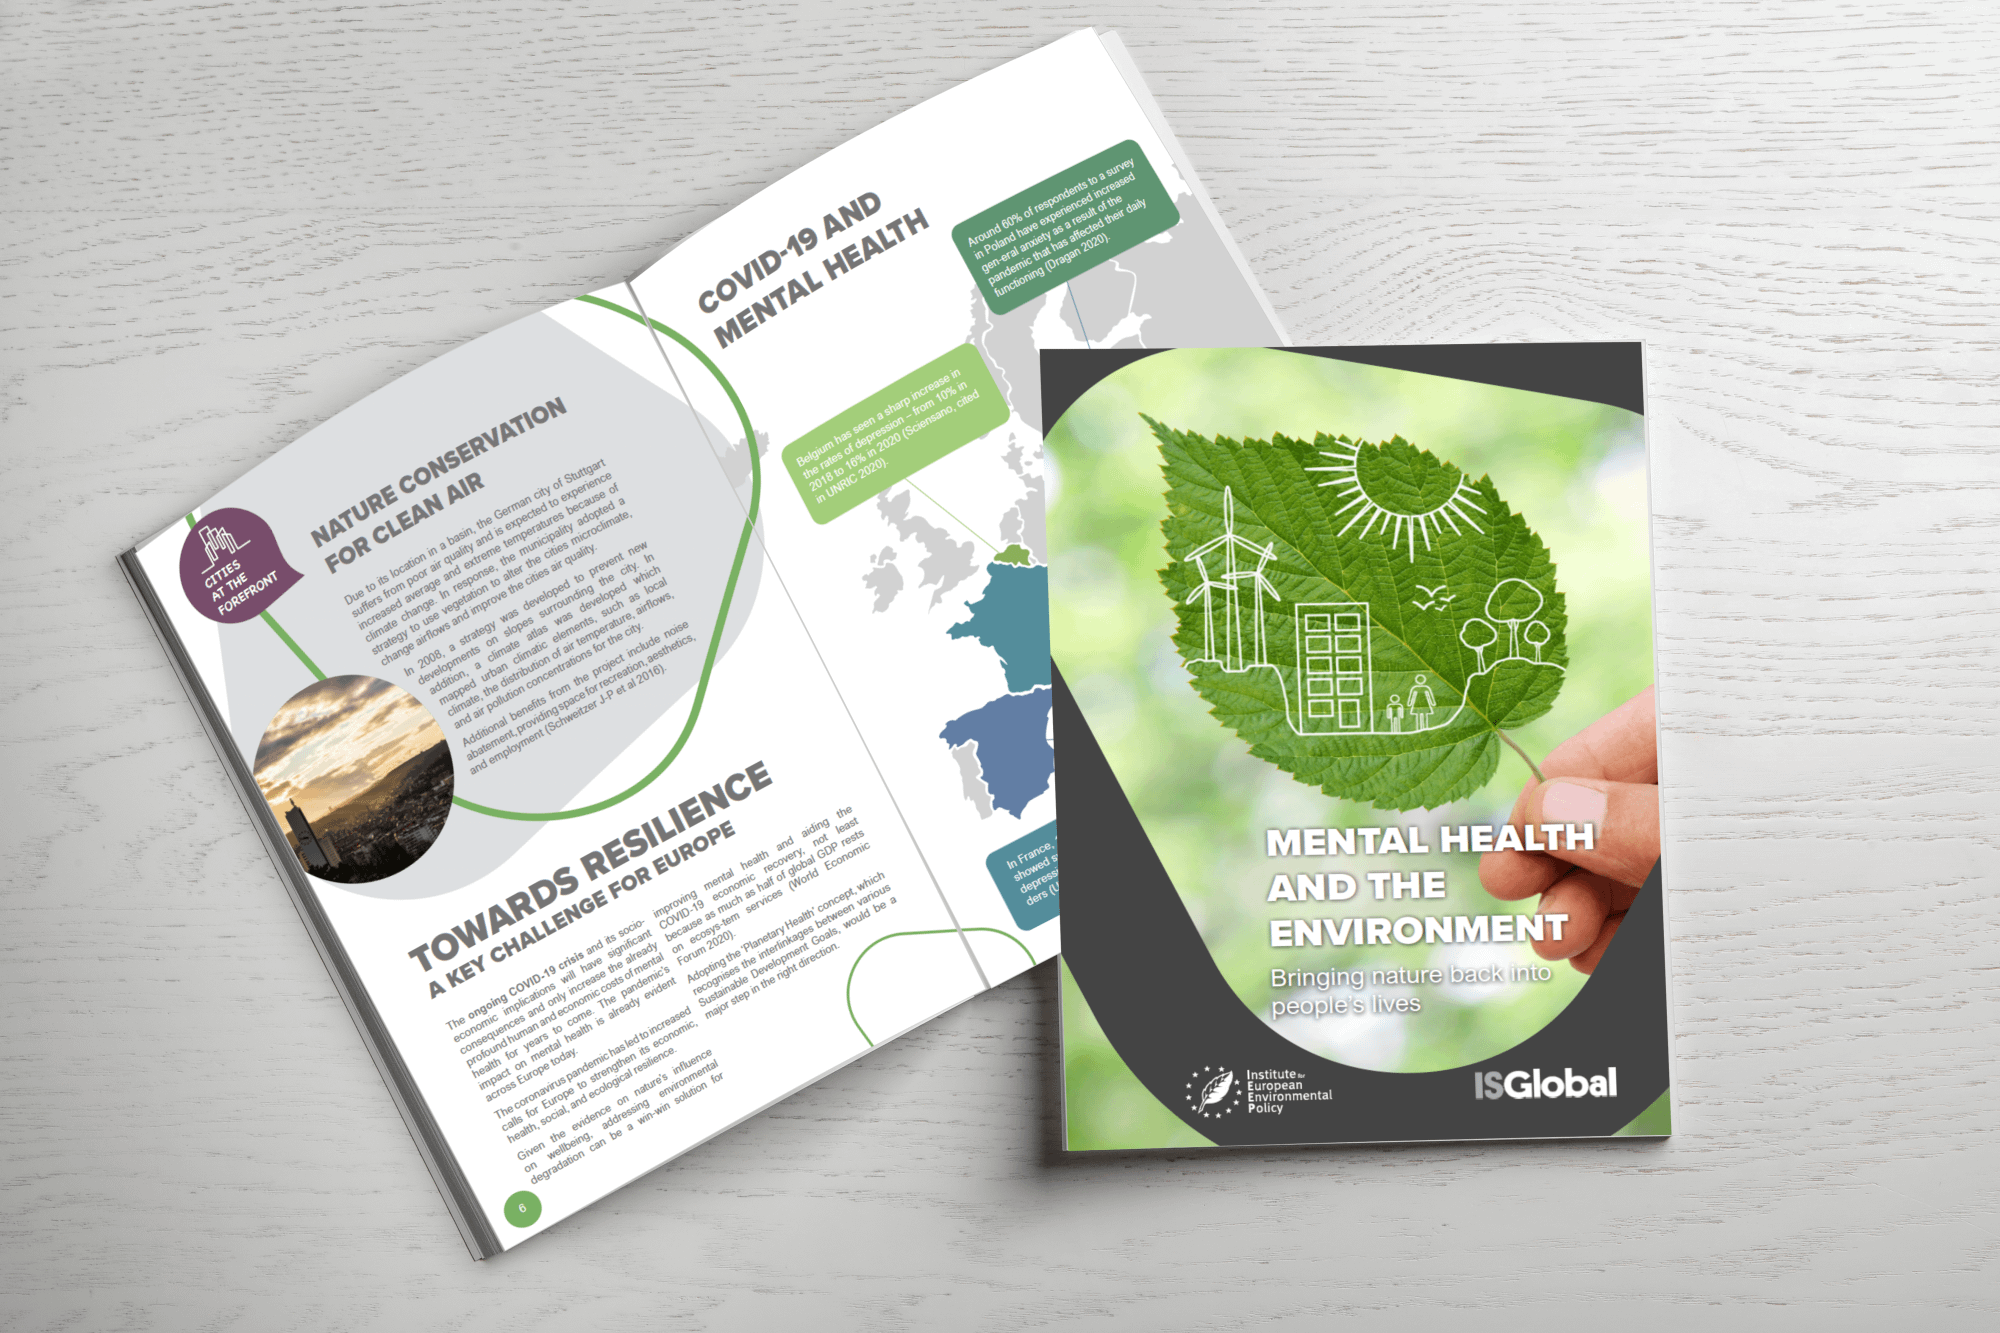 IEEP brochure on Mental health and the environment - designed by Fastlane